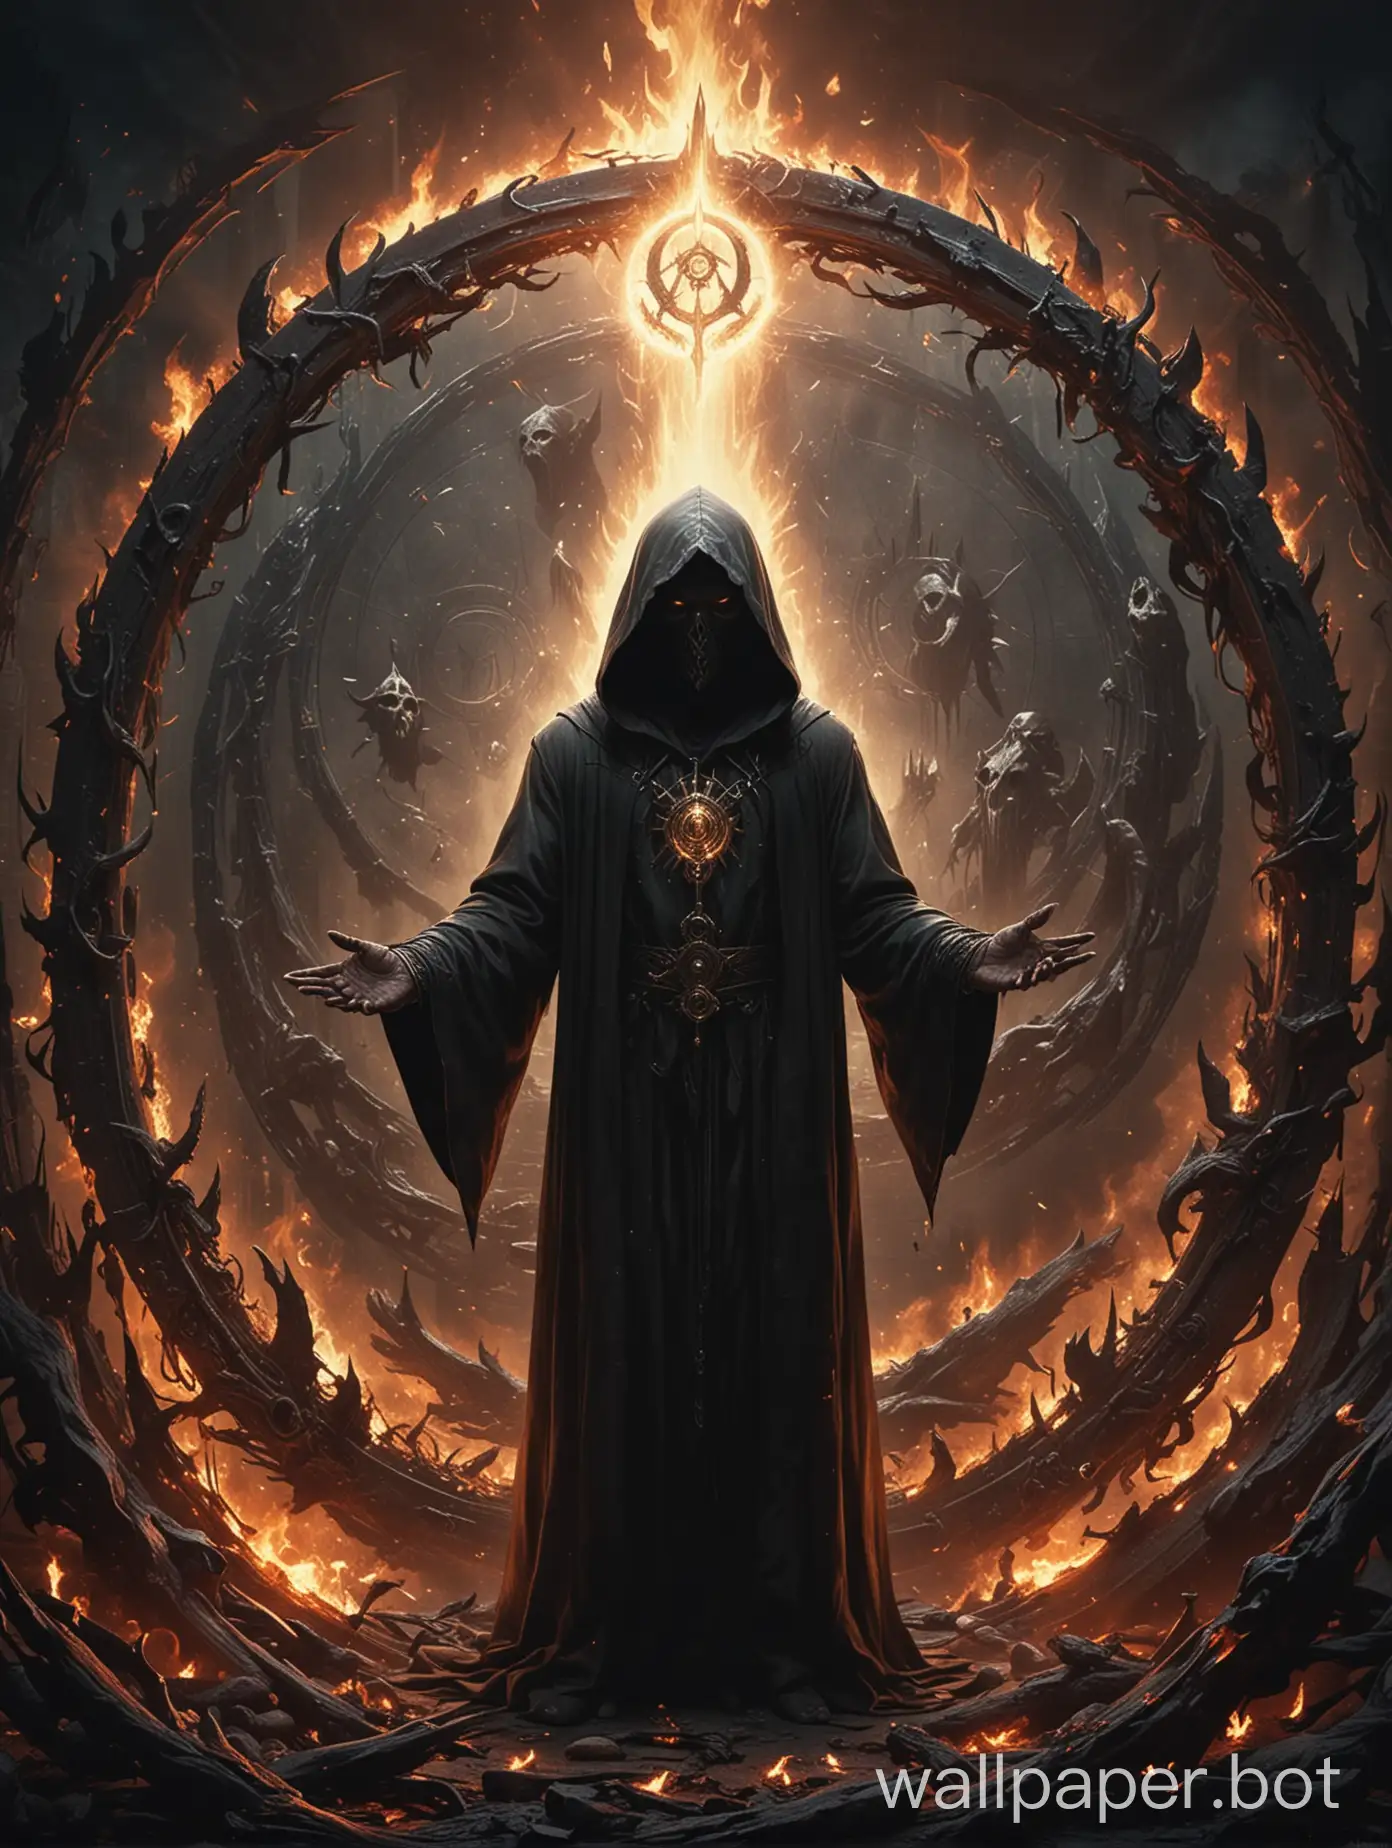 Image of a man in a torn hooded cloak standing in front of a circular object, arms held up, creatures in the background, occultist, dark metal music art, cultist, sacred flame magic, abstract occult epic composition, diablo digital concept art, album art, god of death, detailed cover artwork, king of time, the allfather, dark soul concept